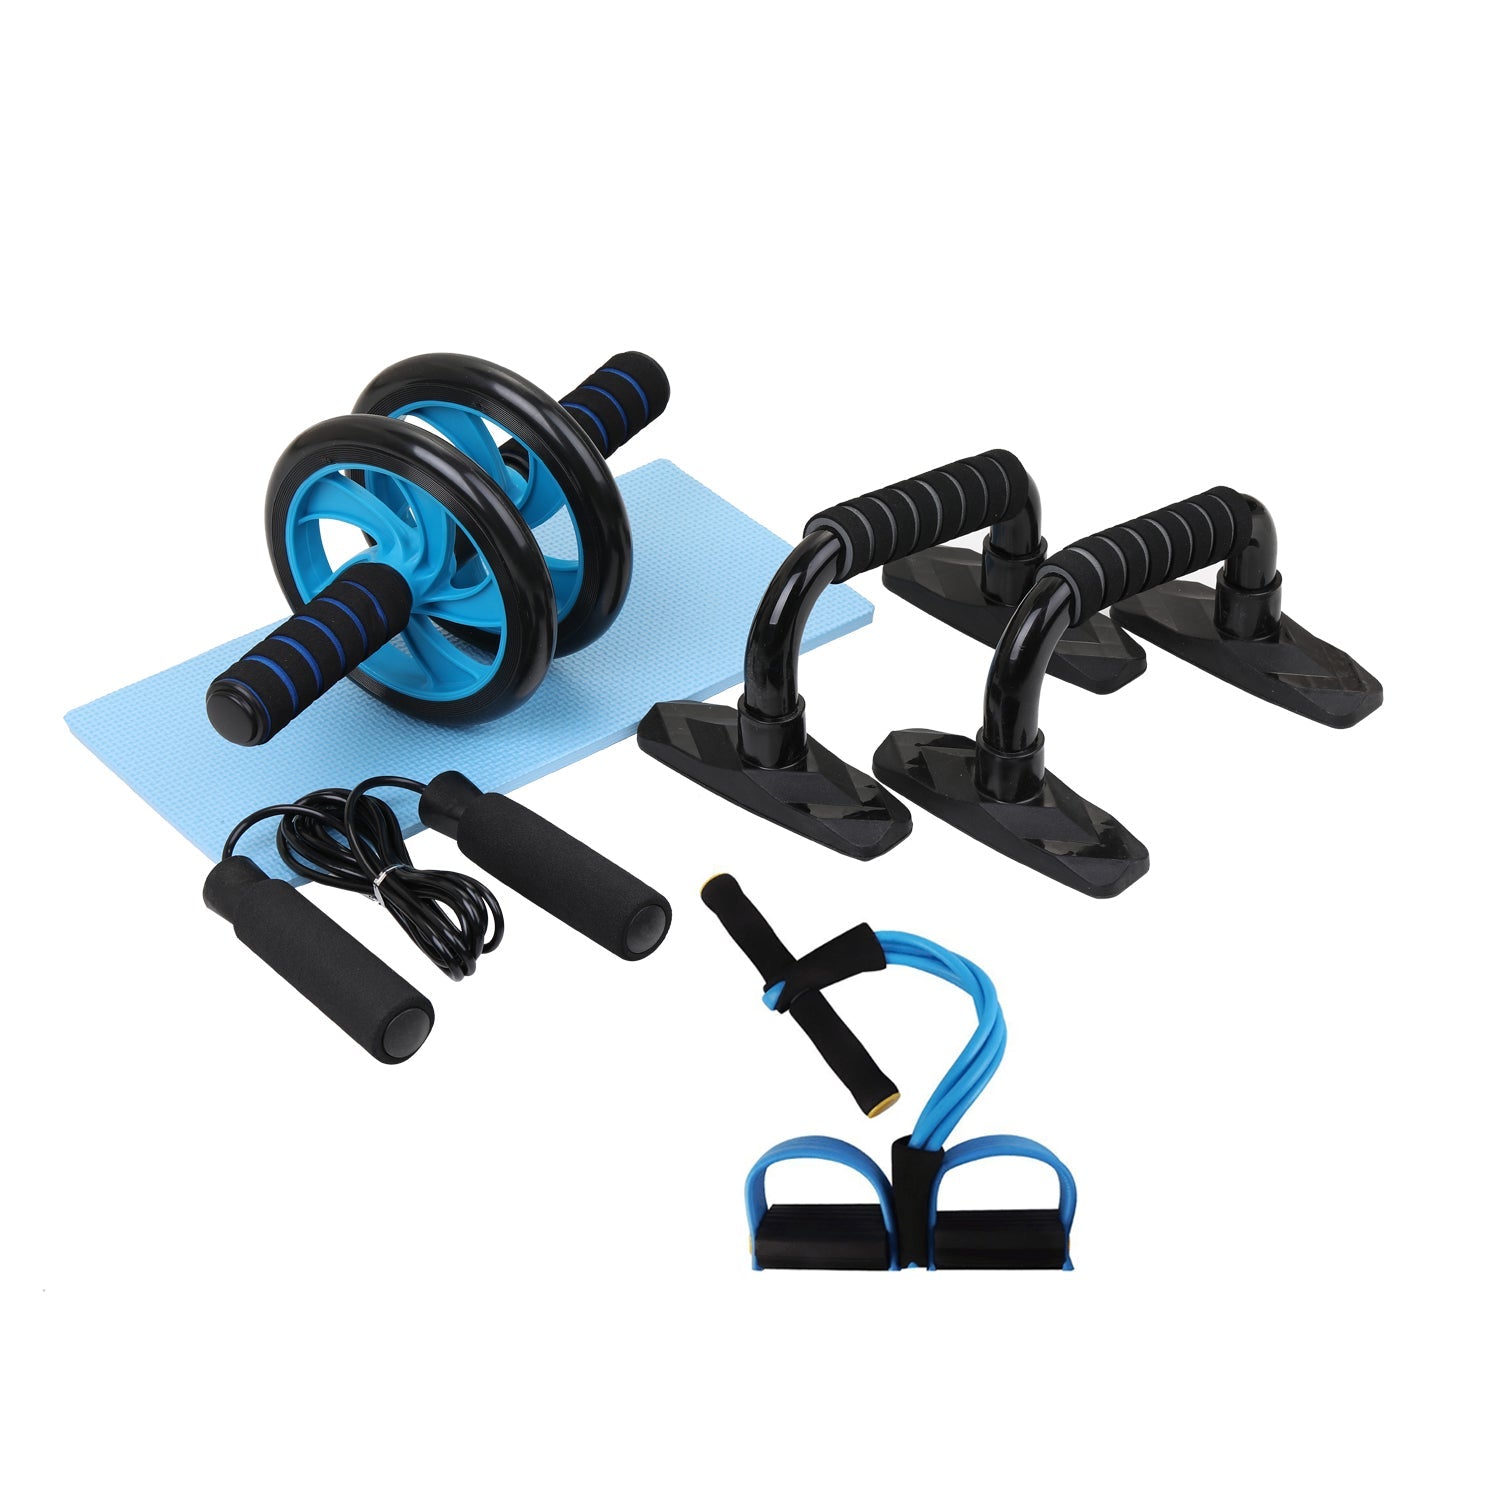 Gym Fitness Equipment - Little Commodities